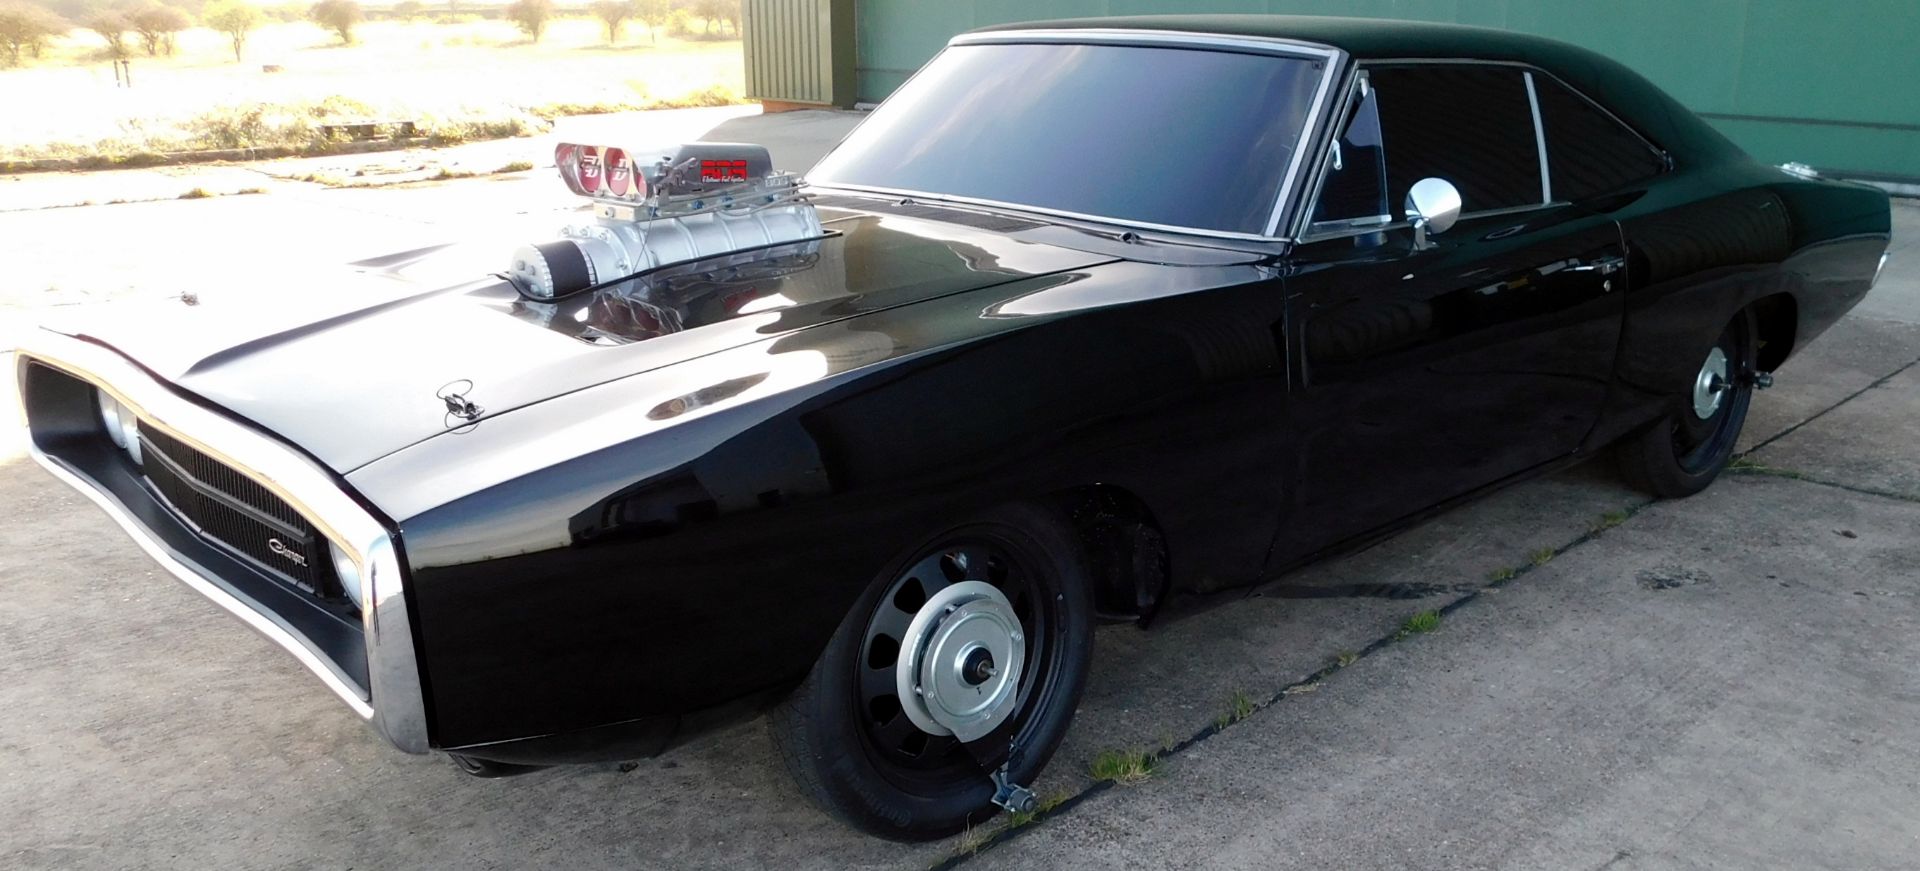 Modified 1970 Dodge Charger RHD 2 Door Saloon, Electric Drive, Hydraulic (Wheelie) Lift System, " - Image 3 of 21